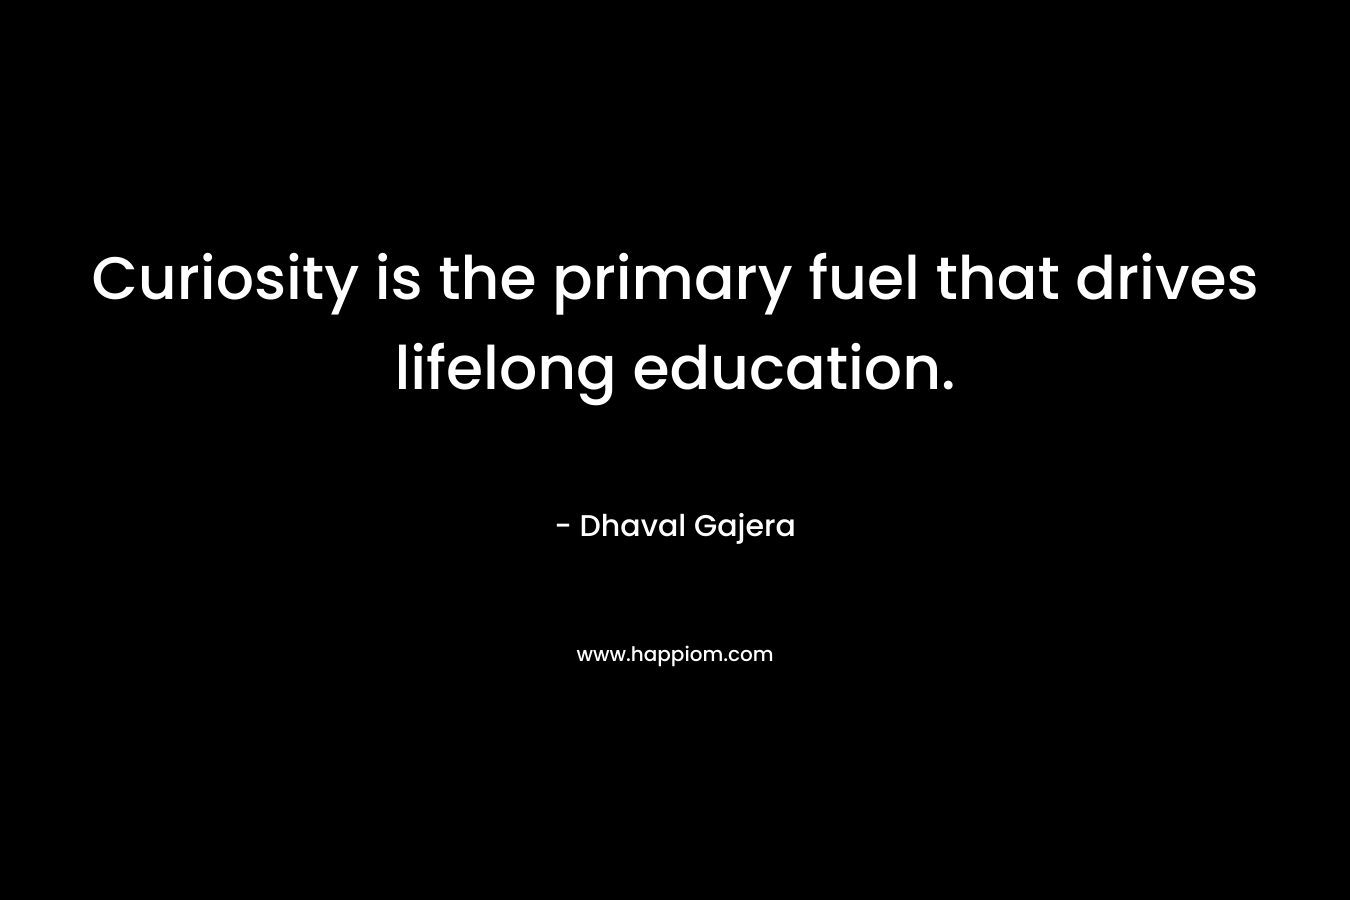 Curiosity is the primary fuel that drives lifelong education. – Dhaval Gajera